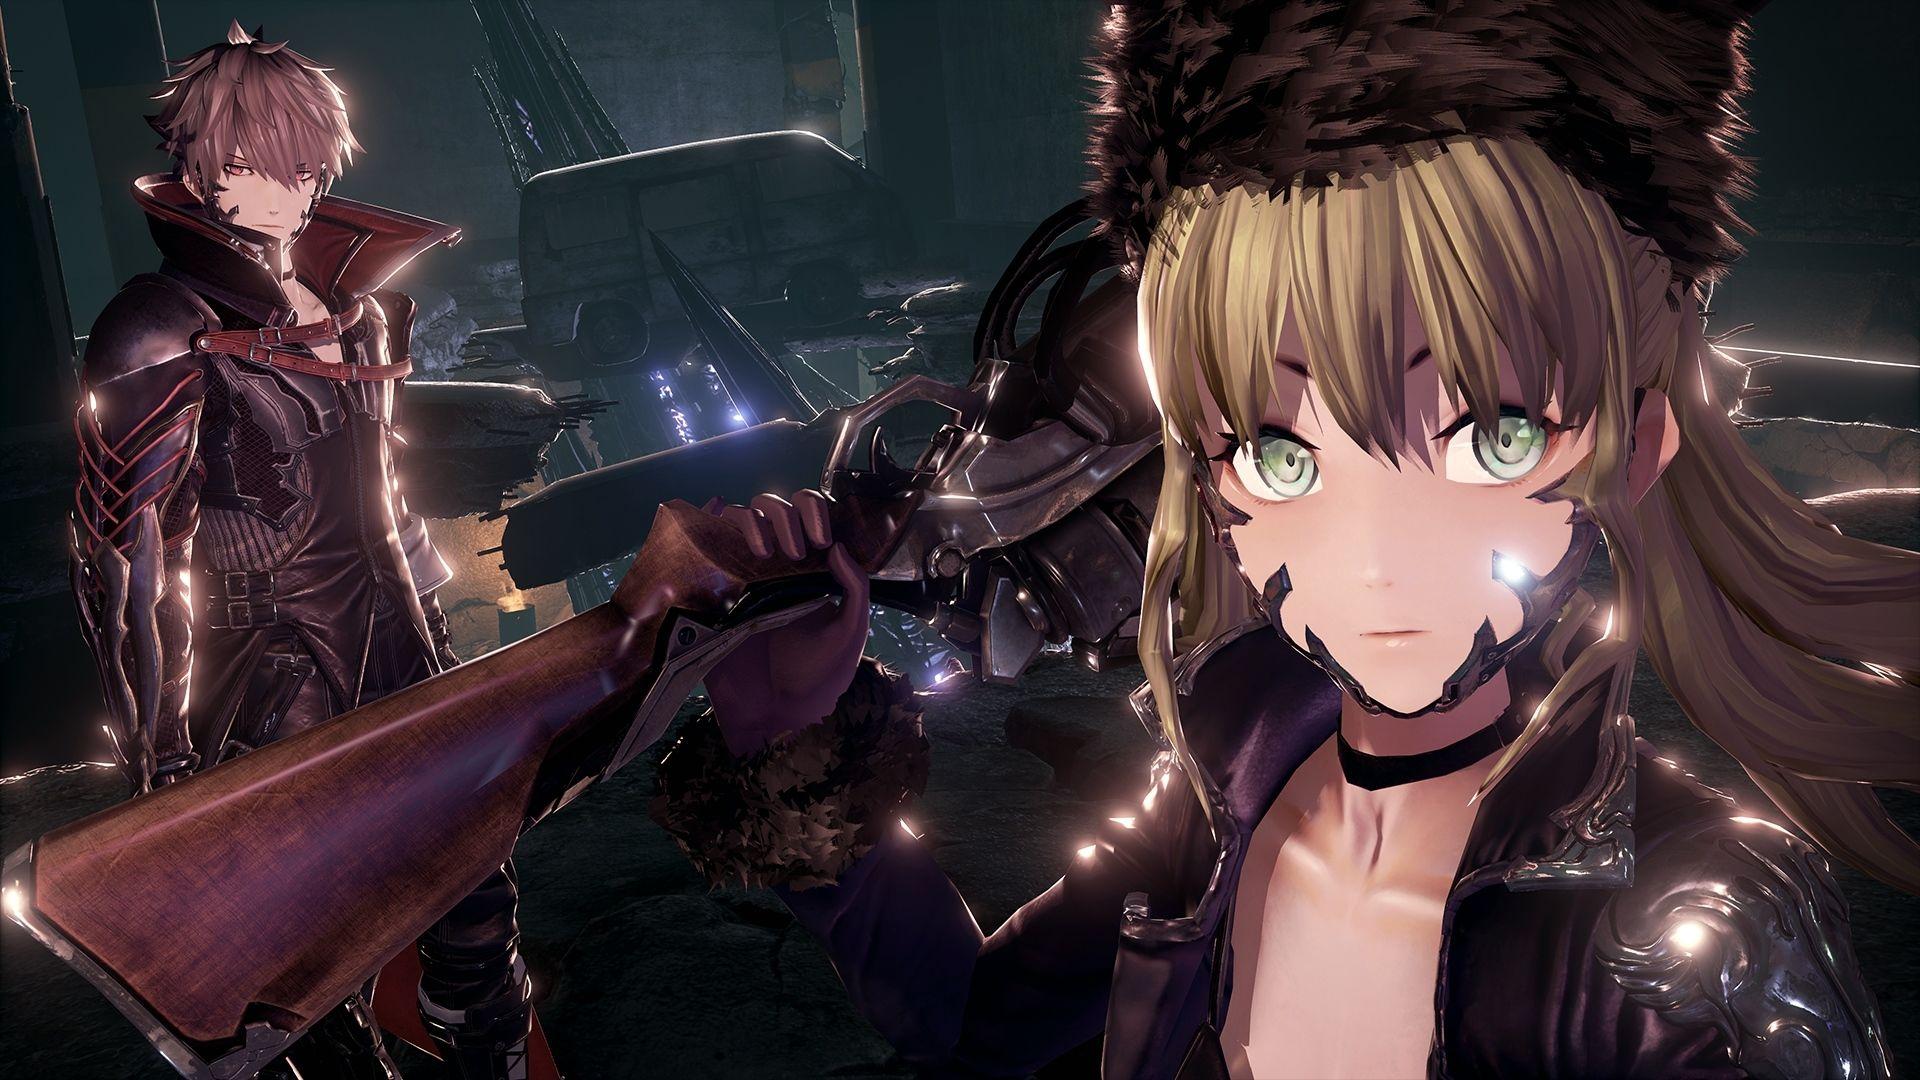 Awesome Code Vein Characters Game 1920x1080 wallpaper. Code Vein